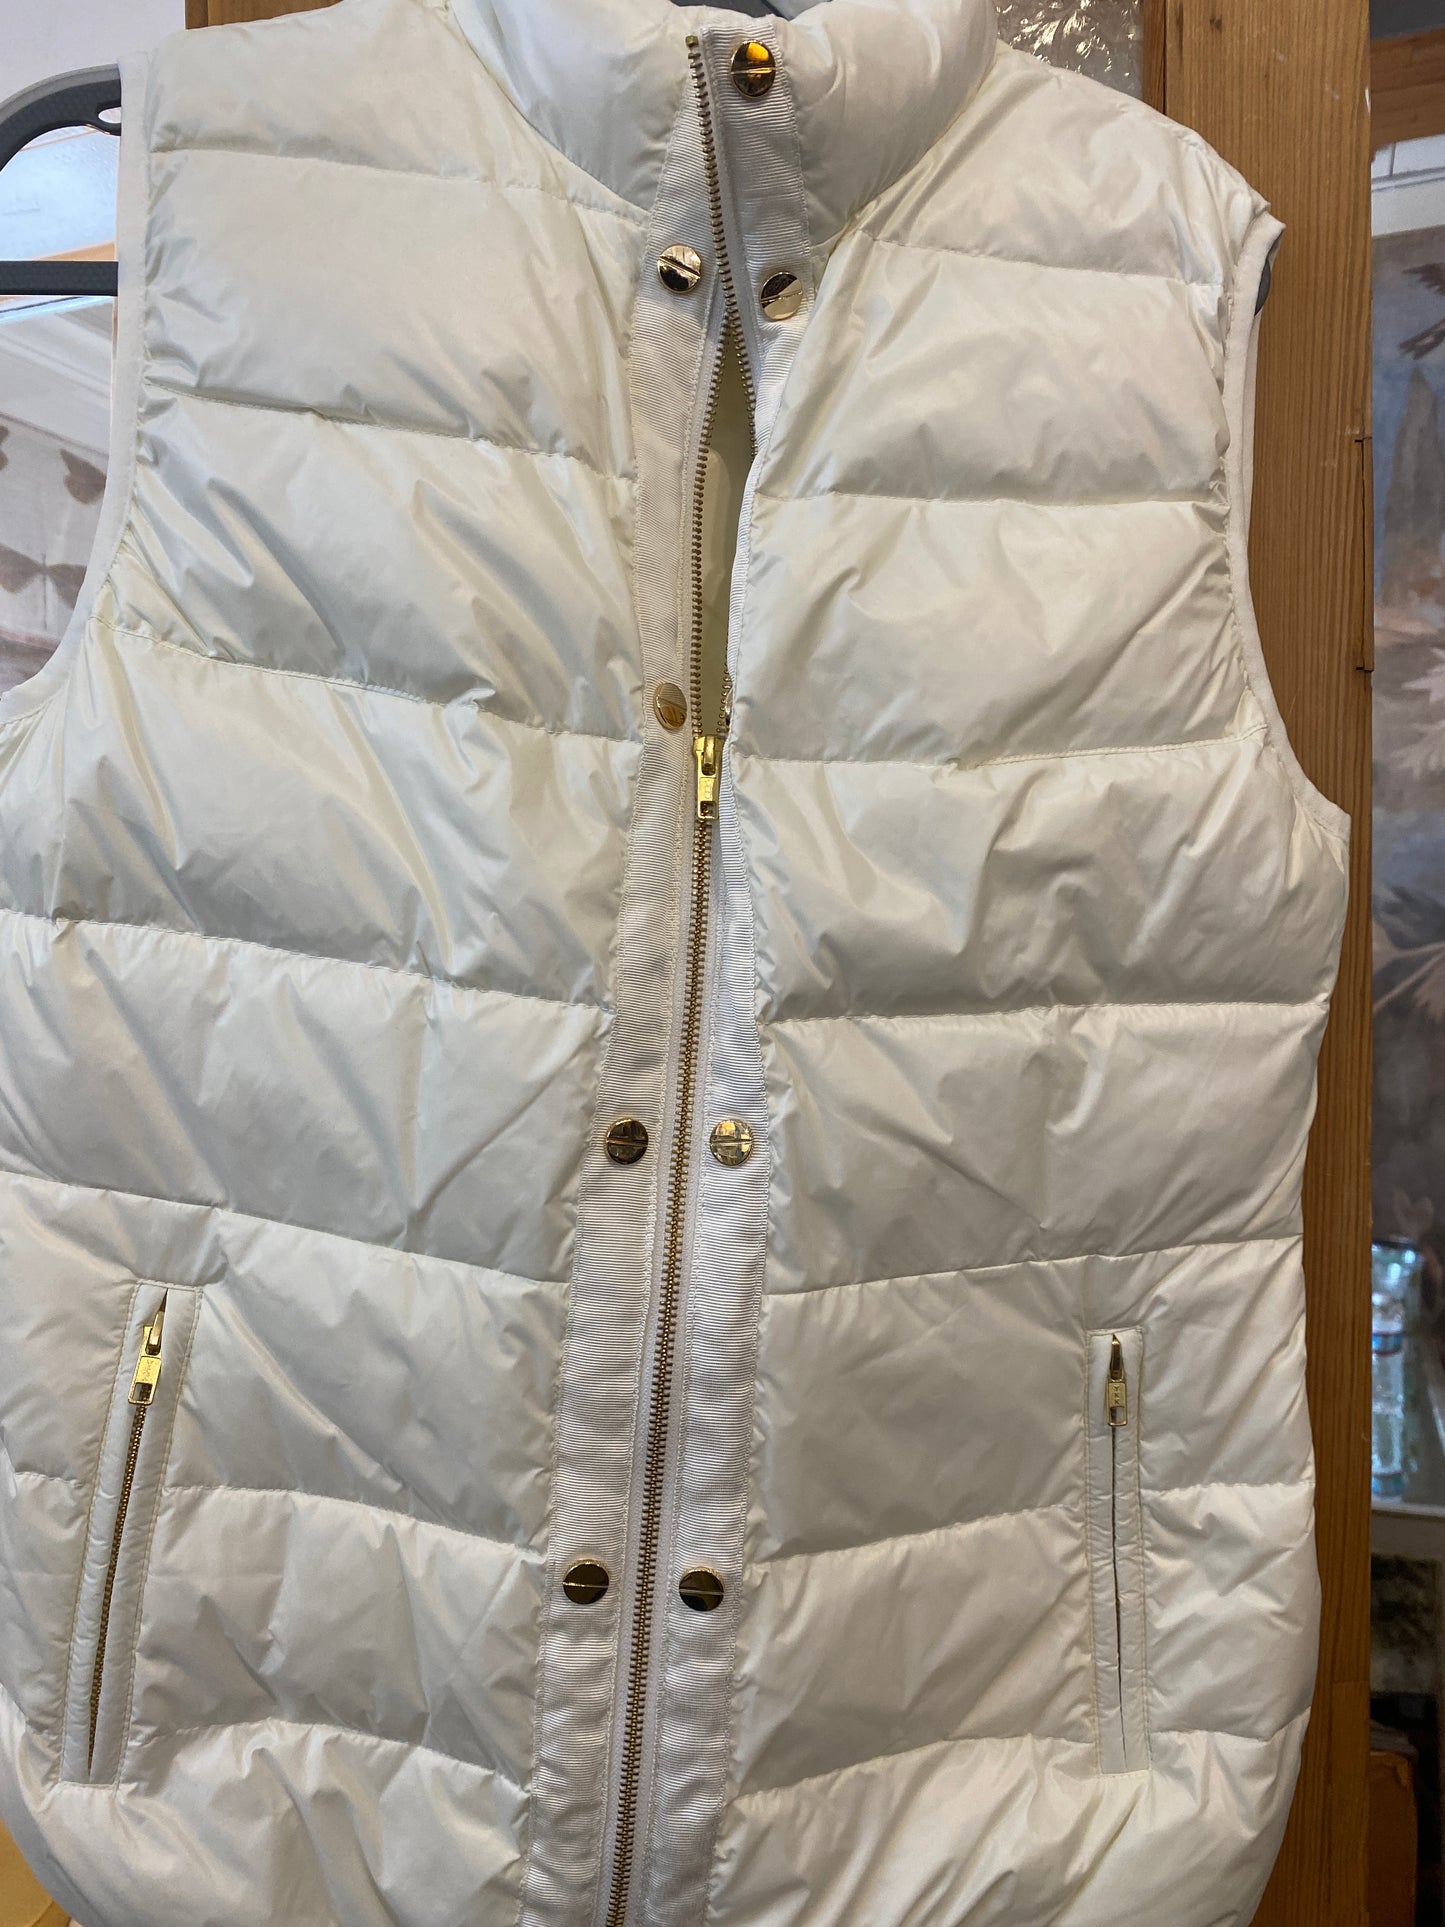 Down Vest With Gold Love Studs on Front